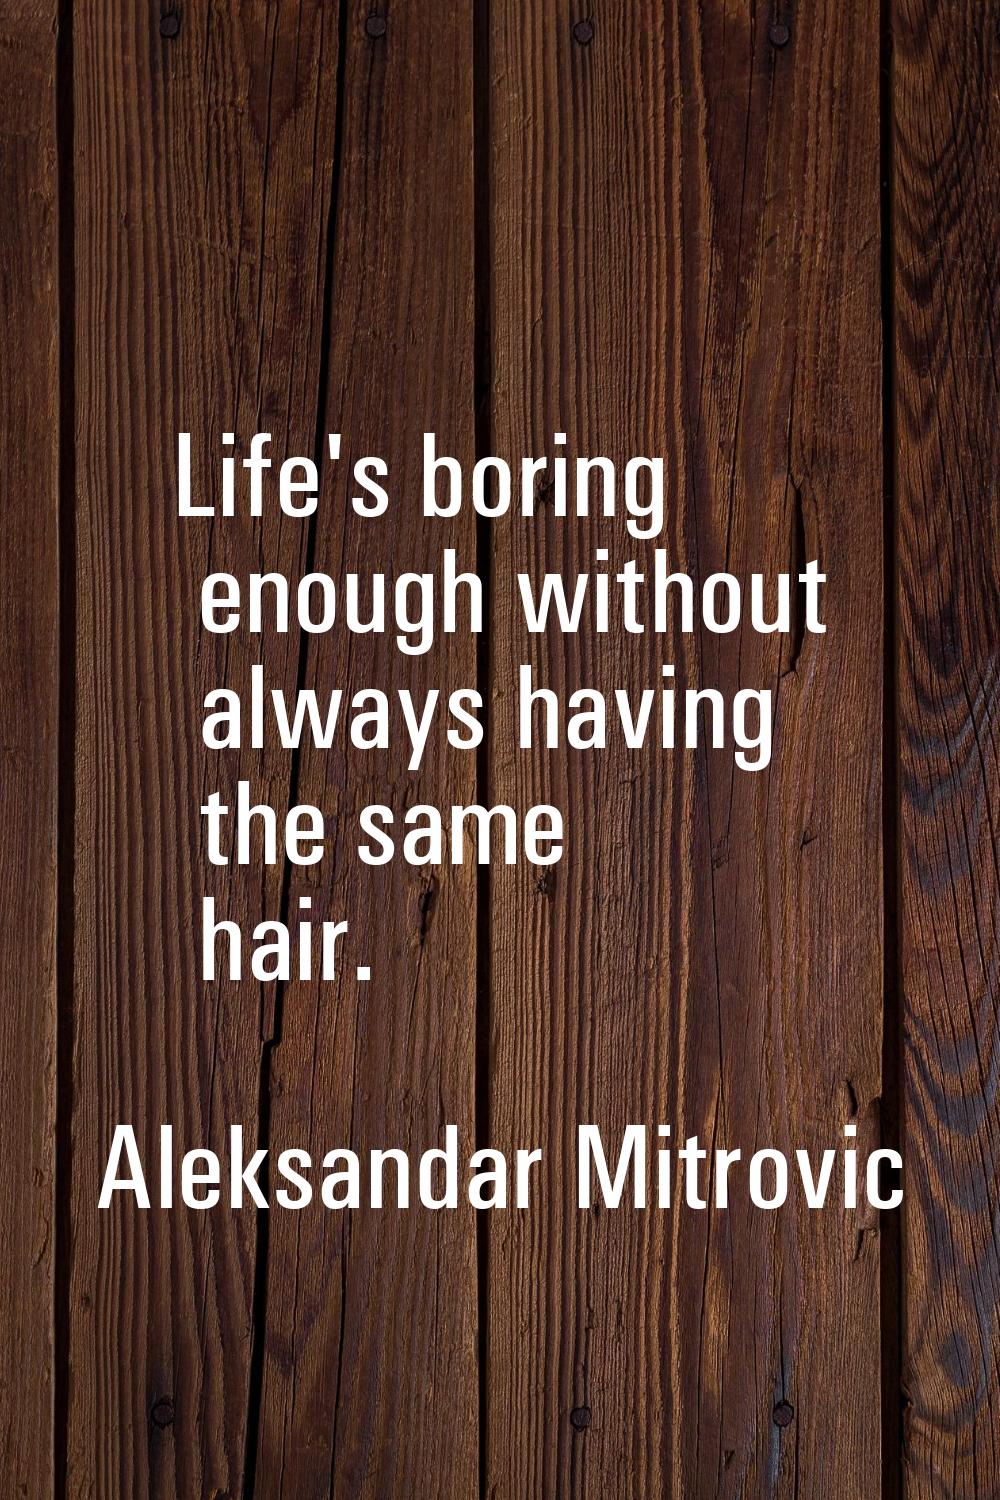 Life's boring enough without always having the same hair.